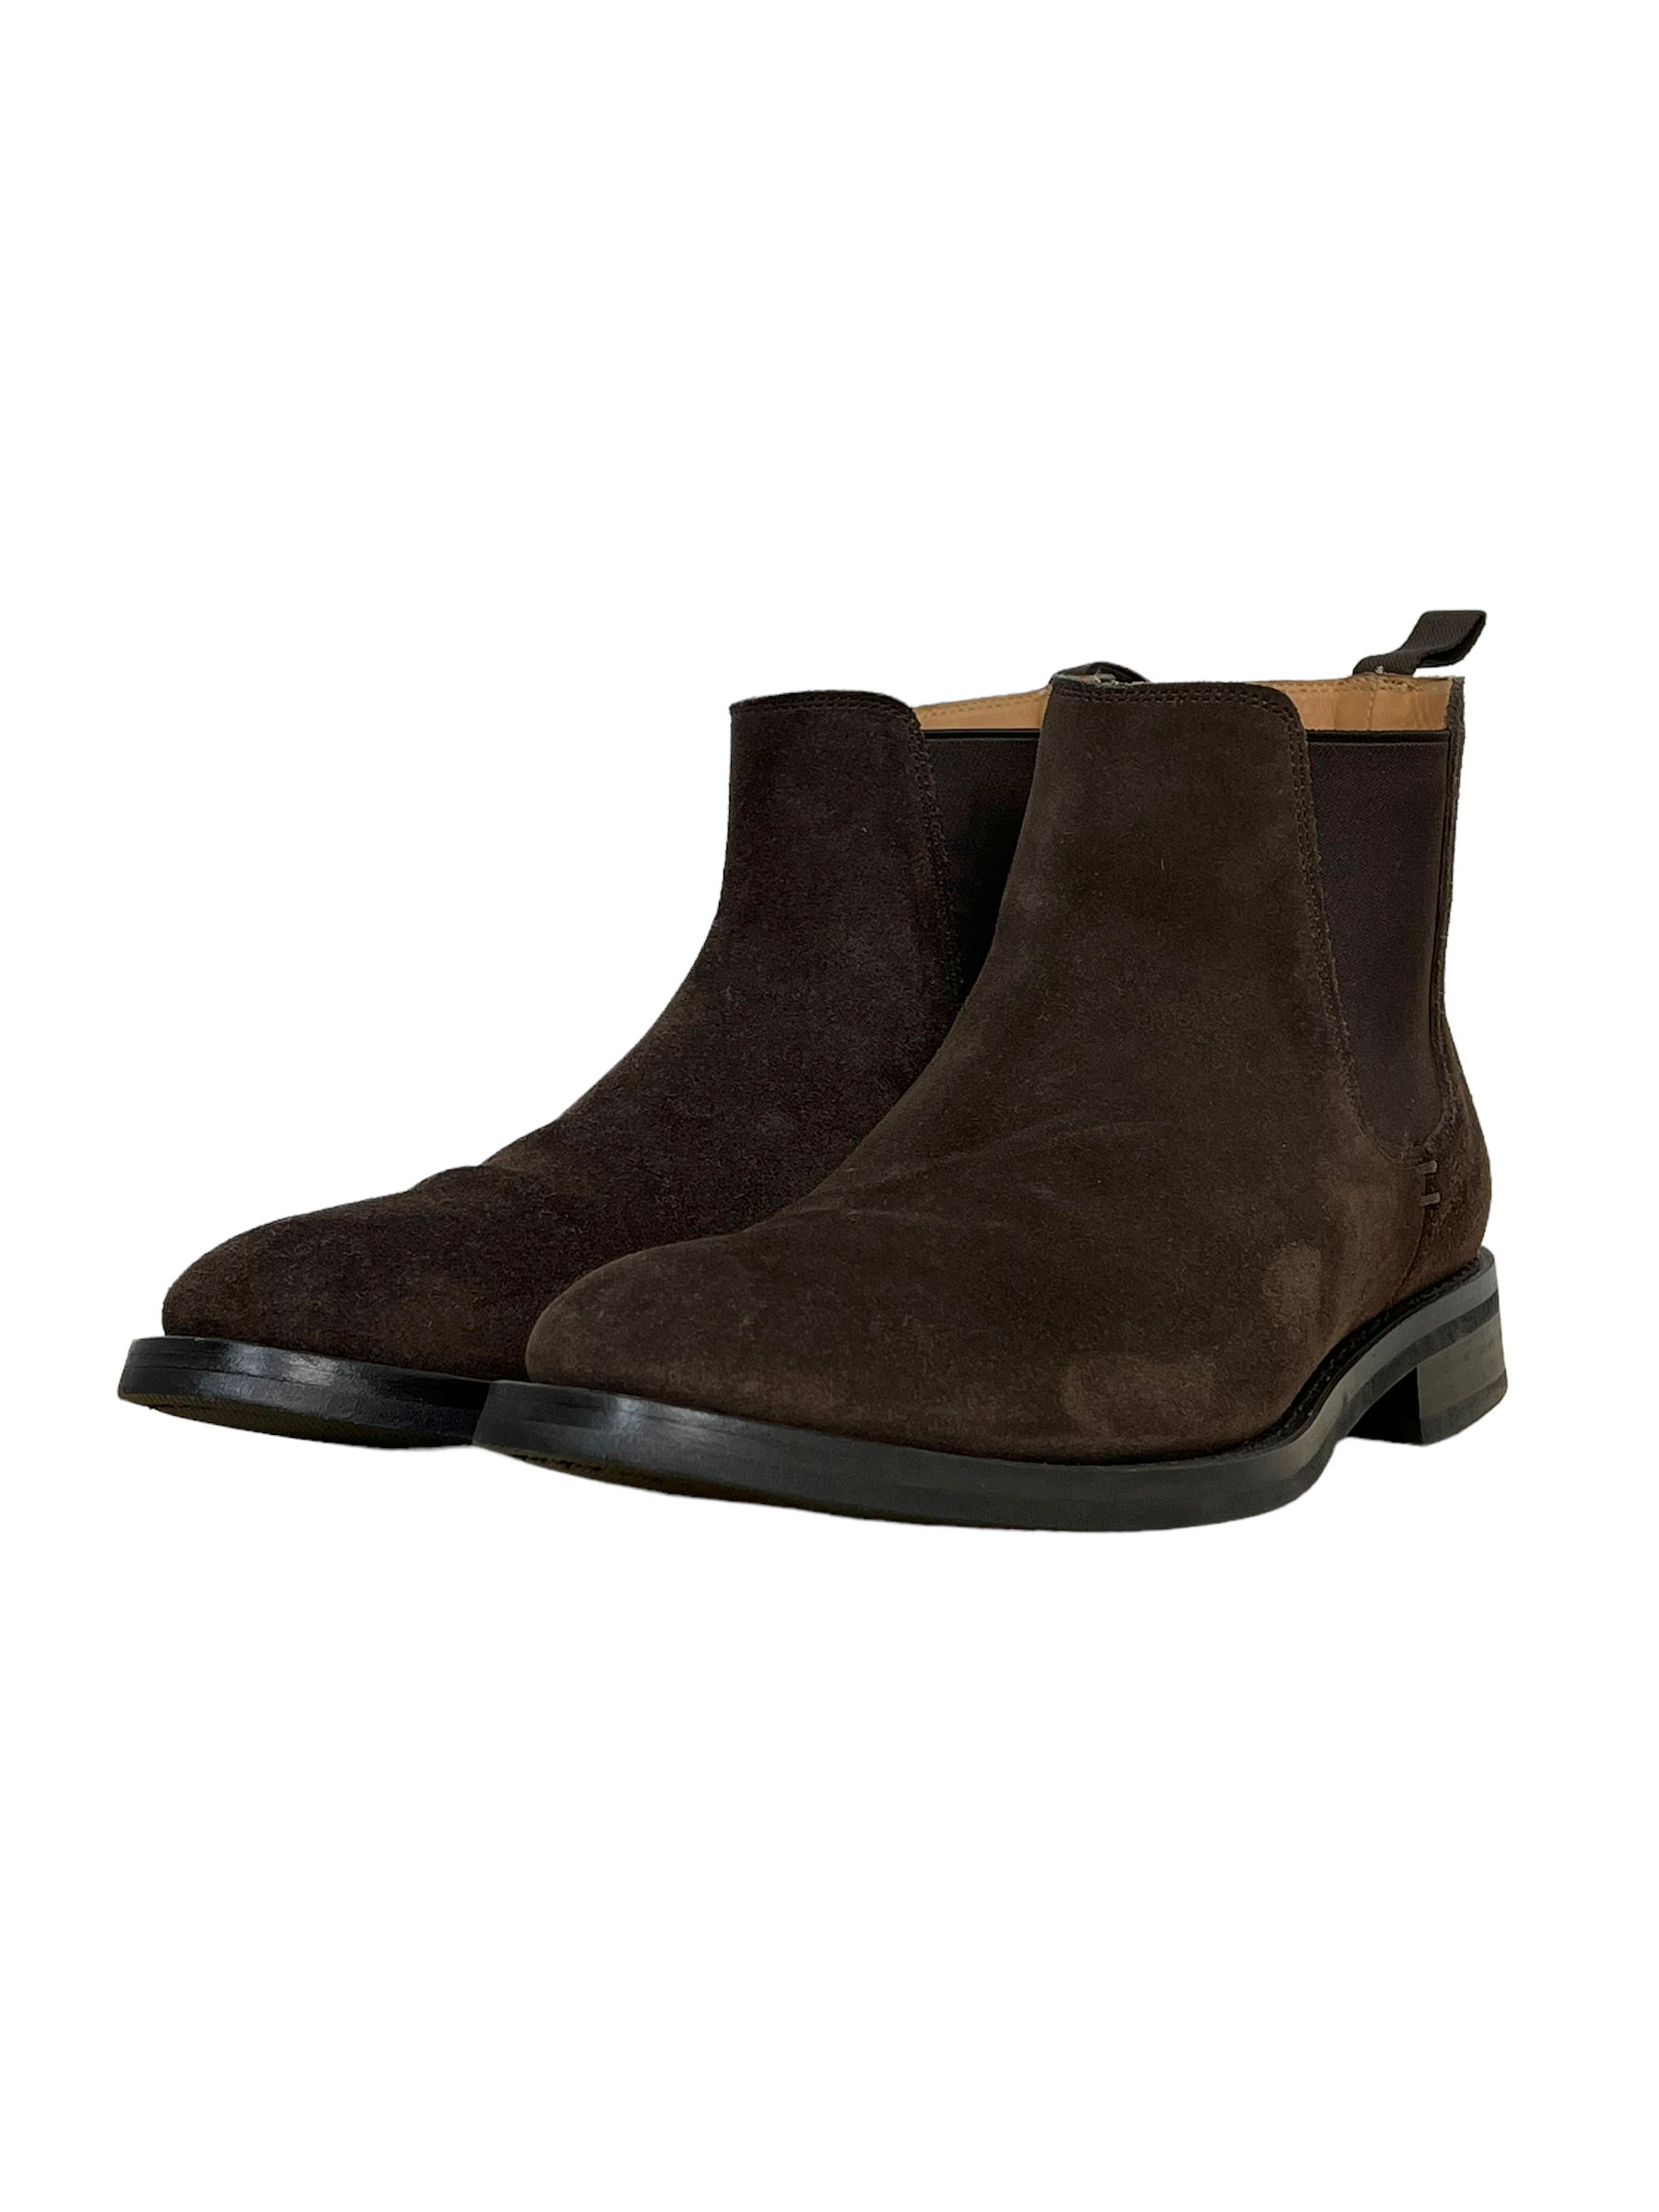 Paul Smith Dark Brown Suede Gerald Chelsea Boots - Genuine Design Luxury Consignment for Men. New & Pre-Owned Clothing, Shoes, & Accessories. Calgary, Canada